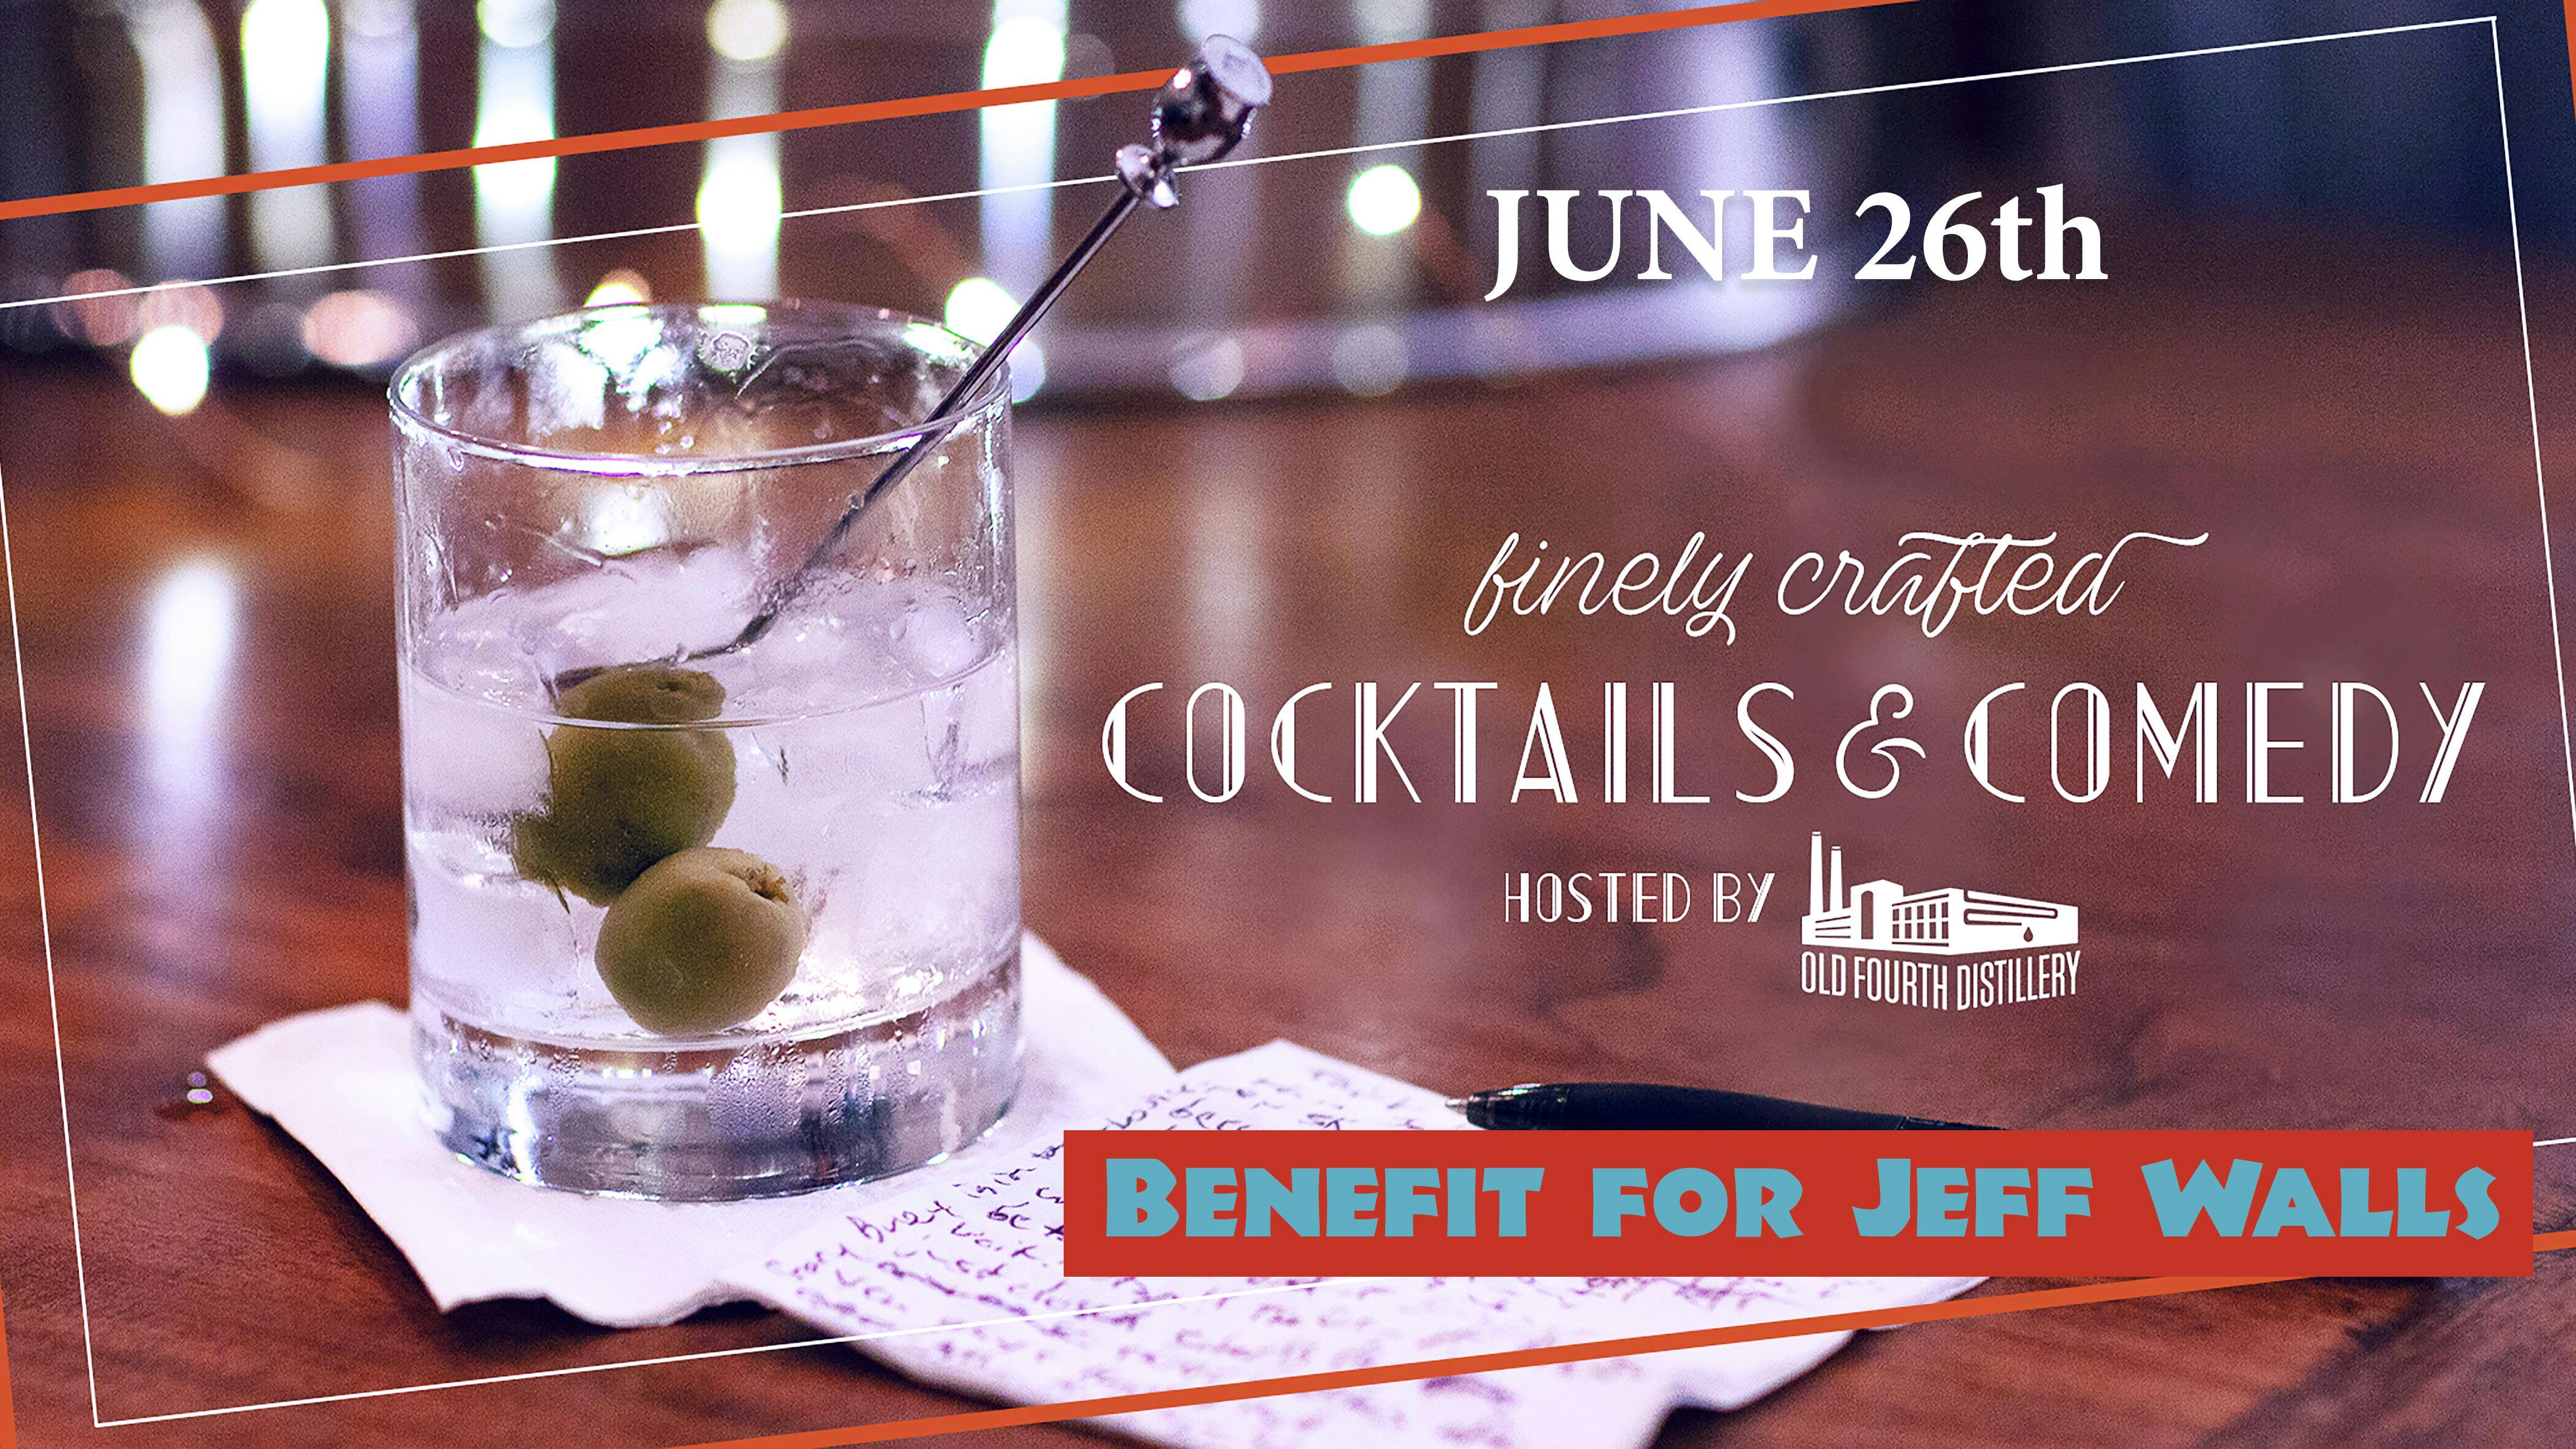 A Benefit for Jeff Walls - presented by Finely Crafted: Cocktails & Comedy